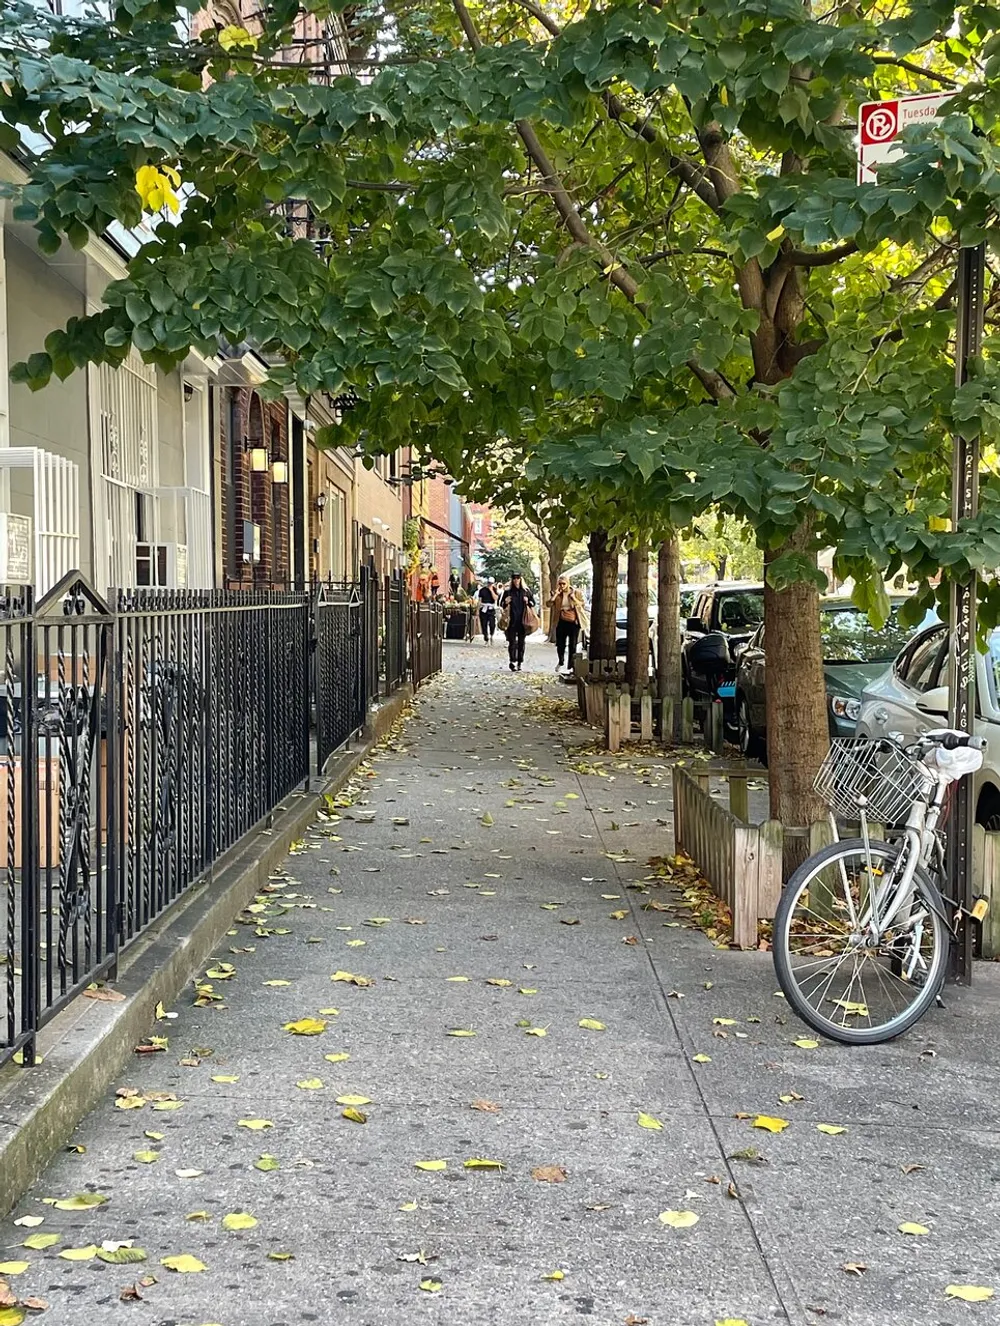 A serene urban scene with people walking down a tree-lined sidewalk dotted with fallen leaves with parked cars and a bicycle to the side